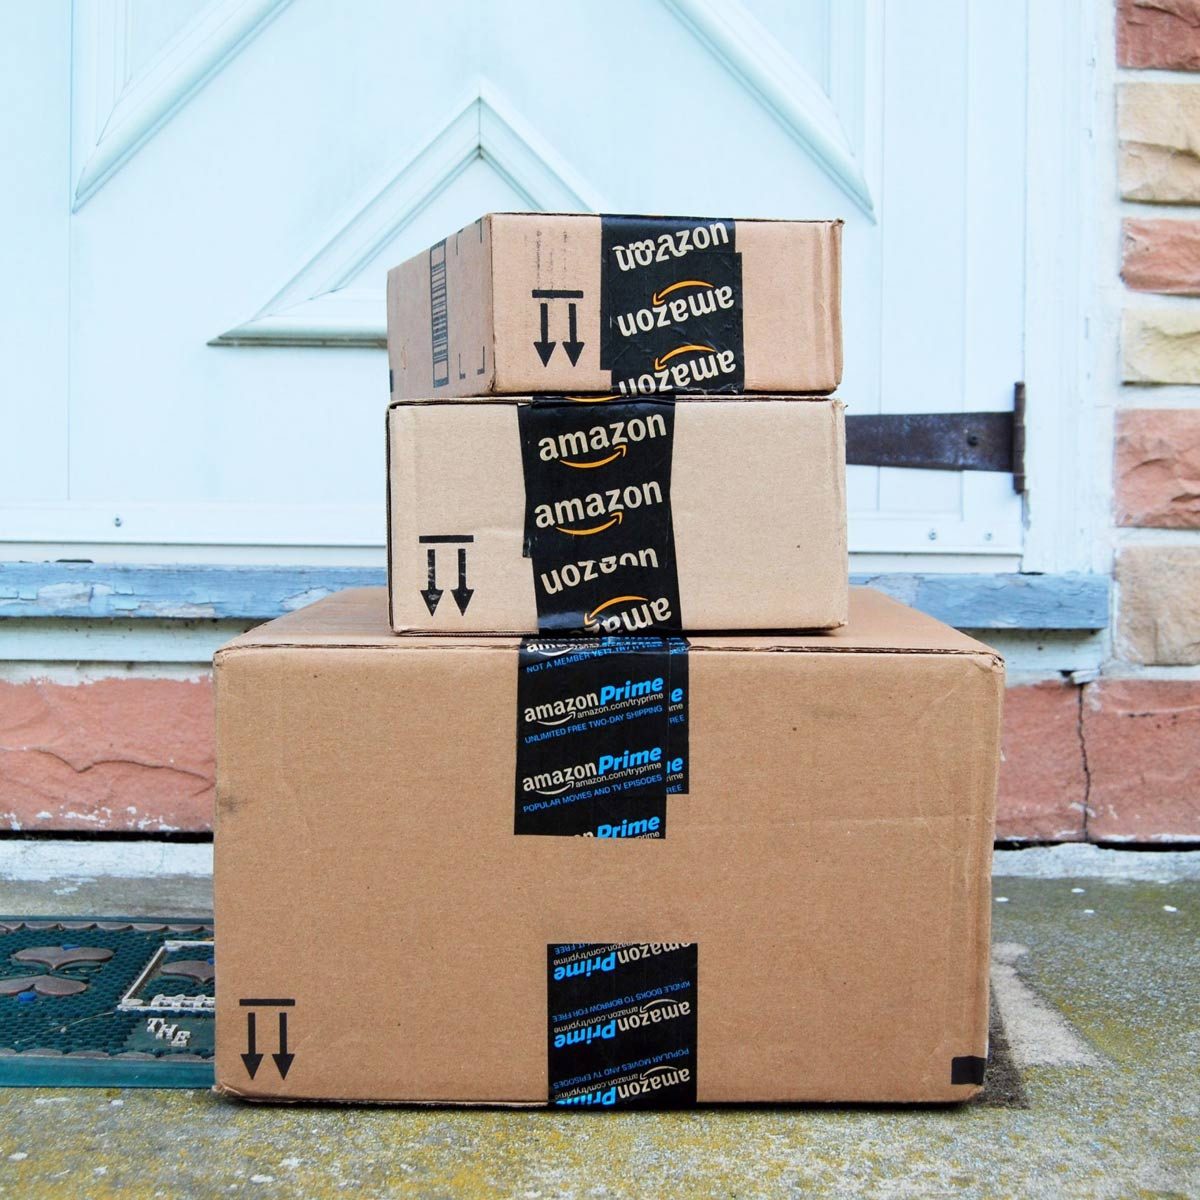 11 Things Amazon Won’t Sell Anymore